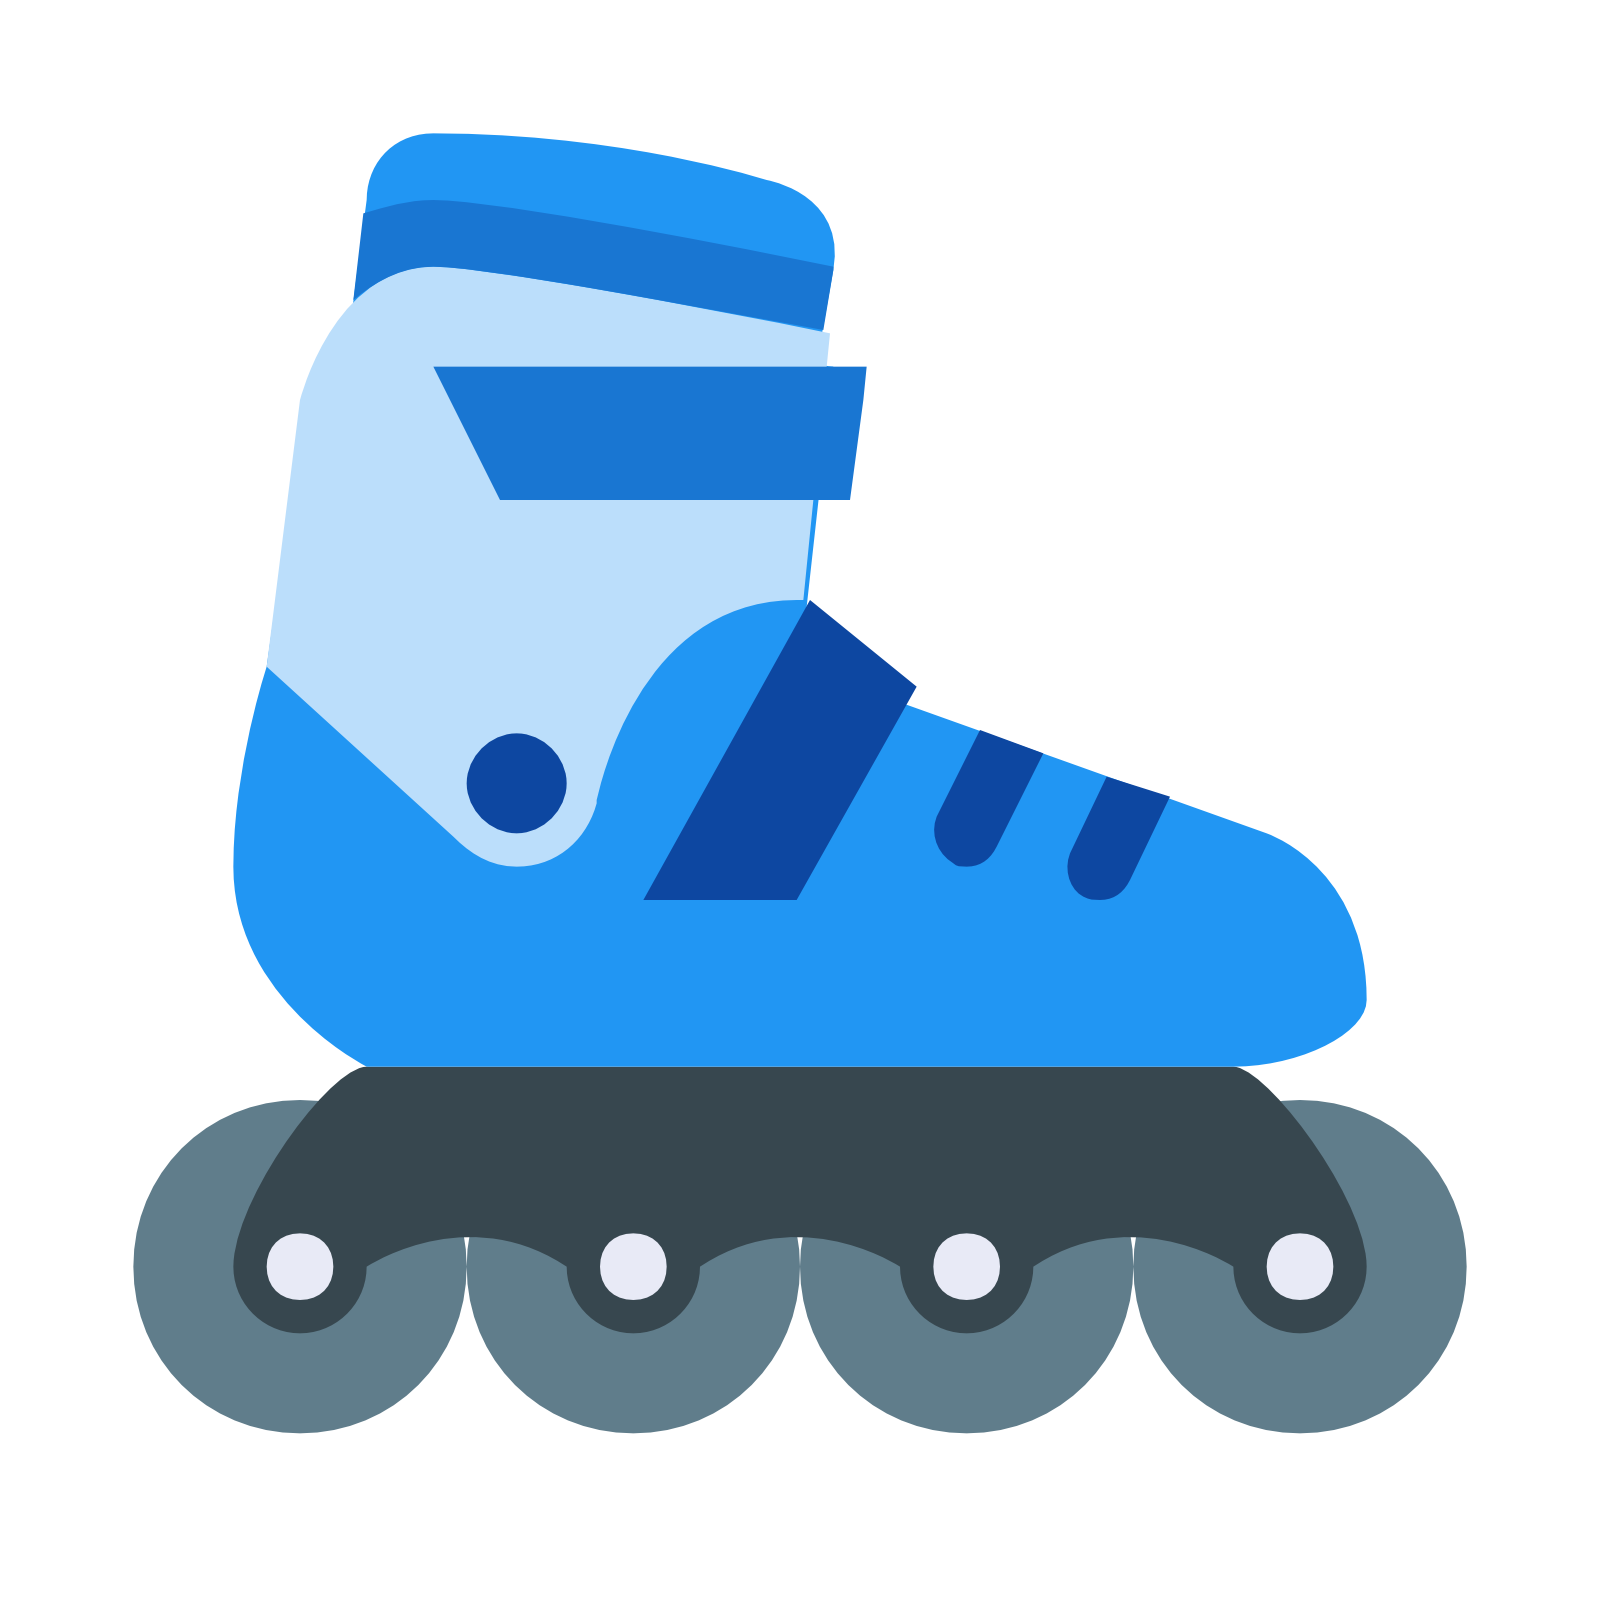 Rollerblades PNG-PlusPNG.com-